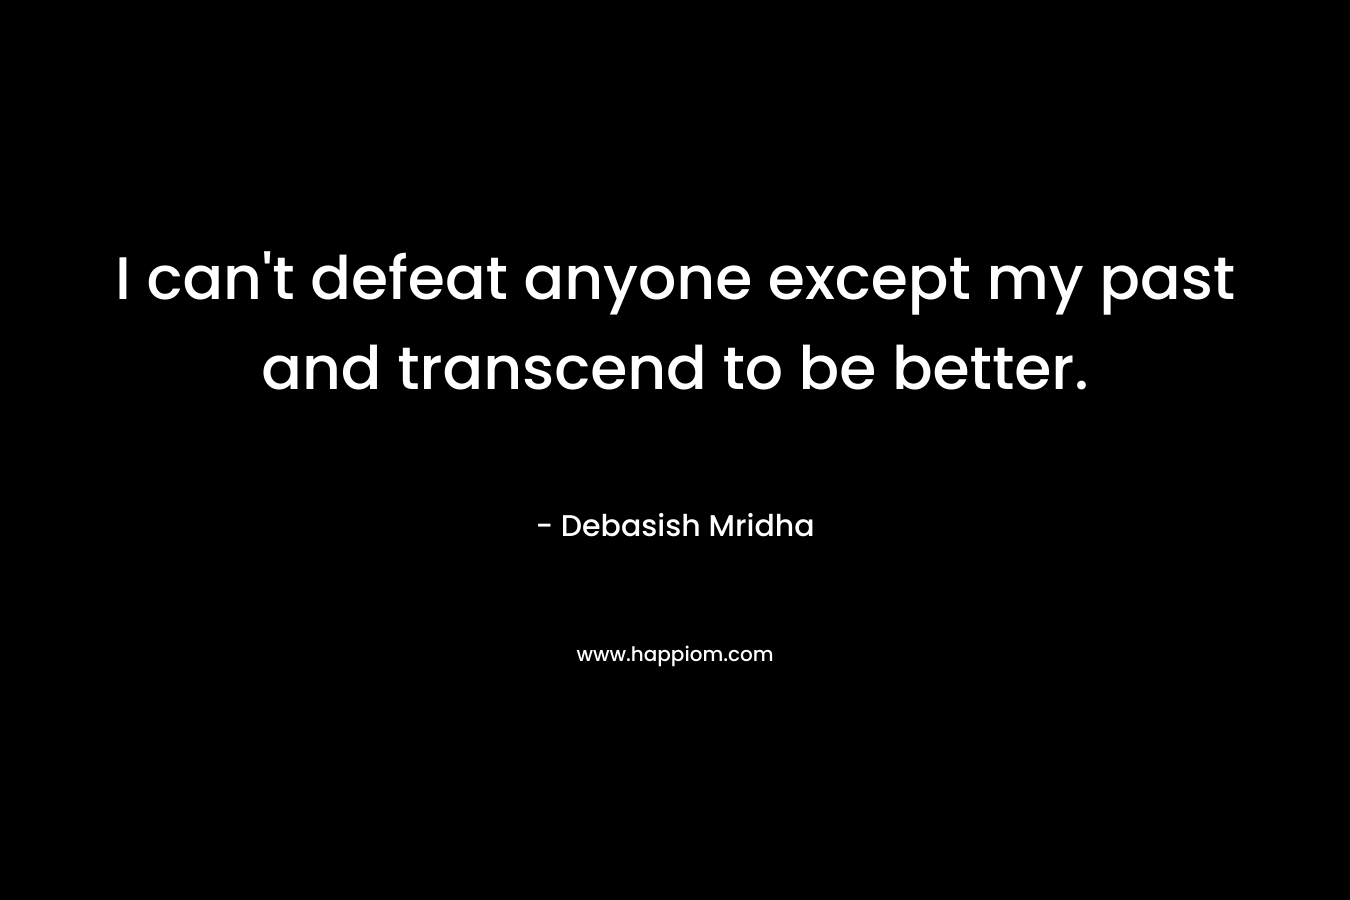 I can’t defeat anyone except my past and transcend to be better. – Debasish Mridha